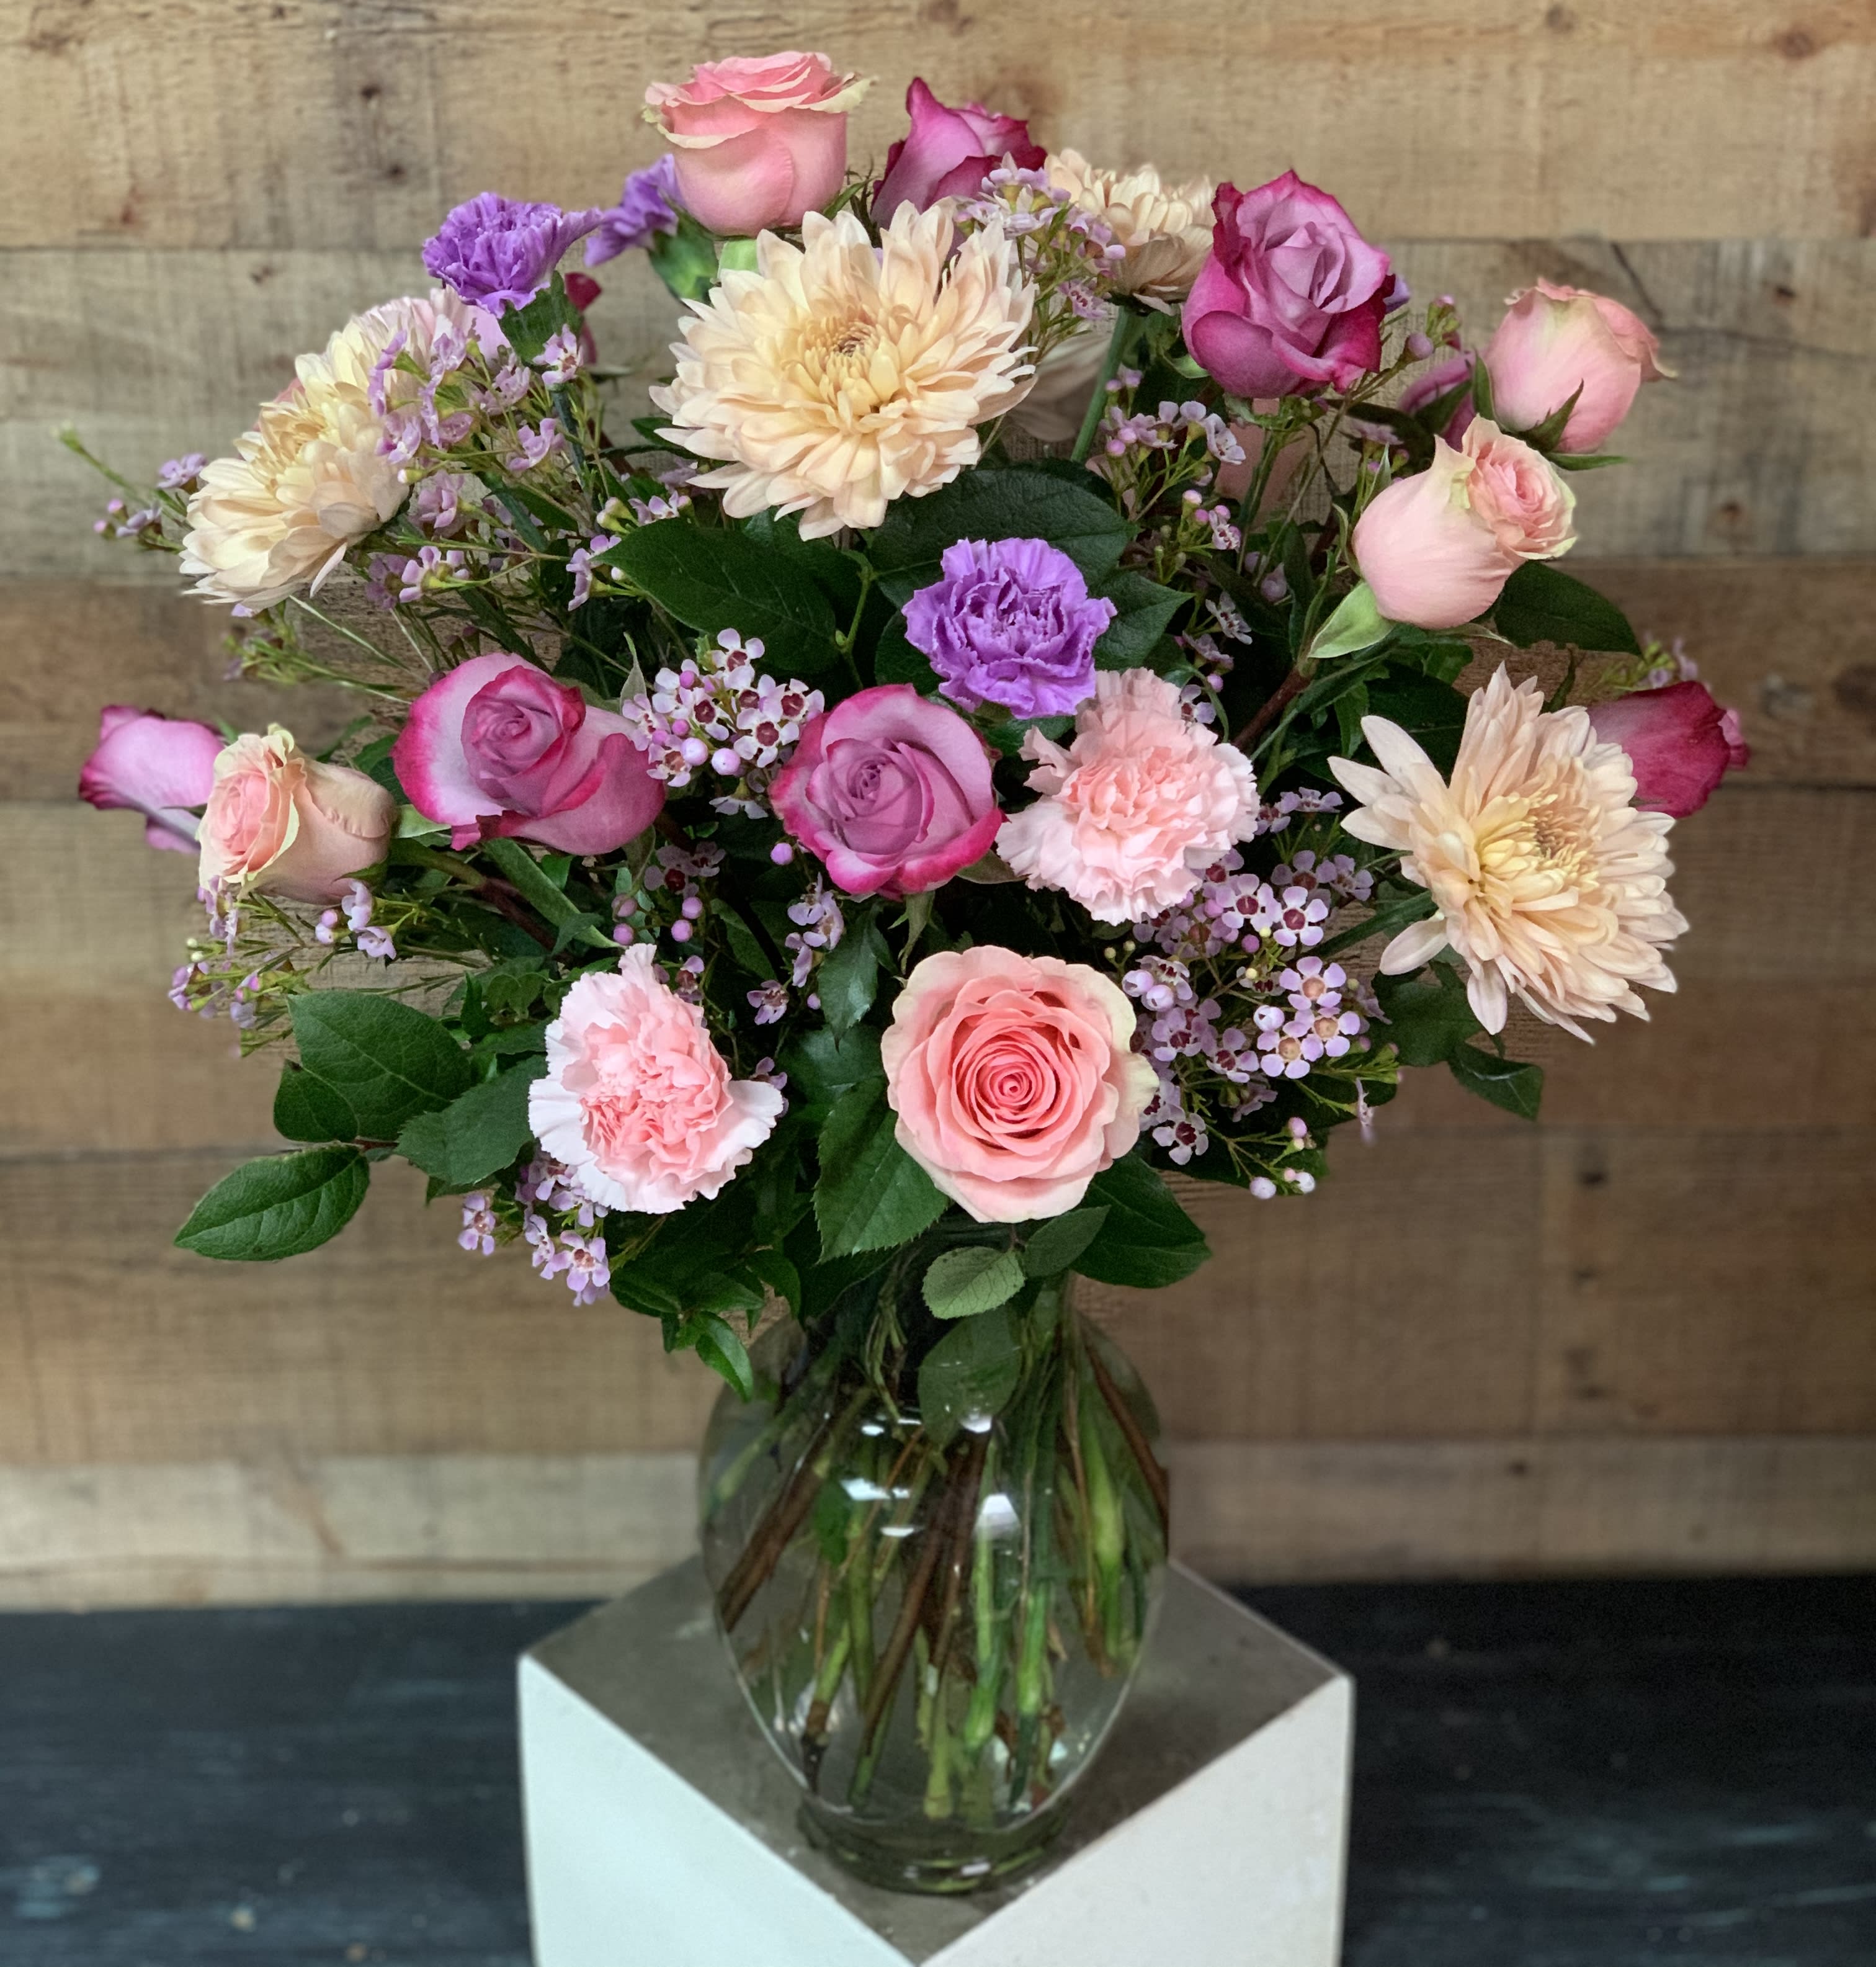 Lovely Blooms - A lovely arrangement of soft colored blooms including roses, carnations, and cremones